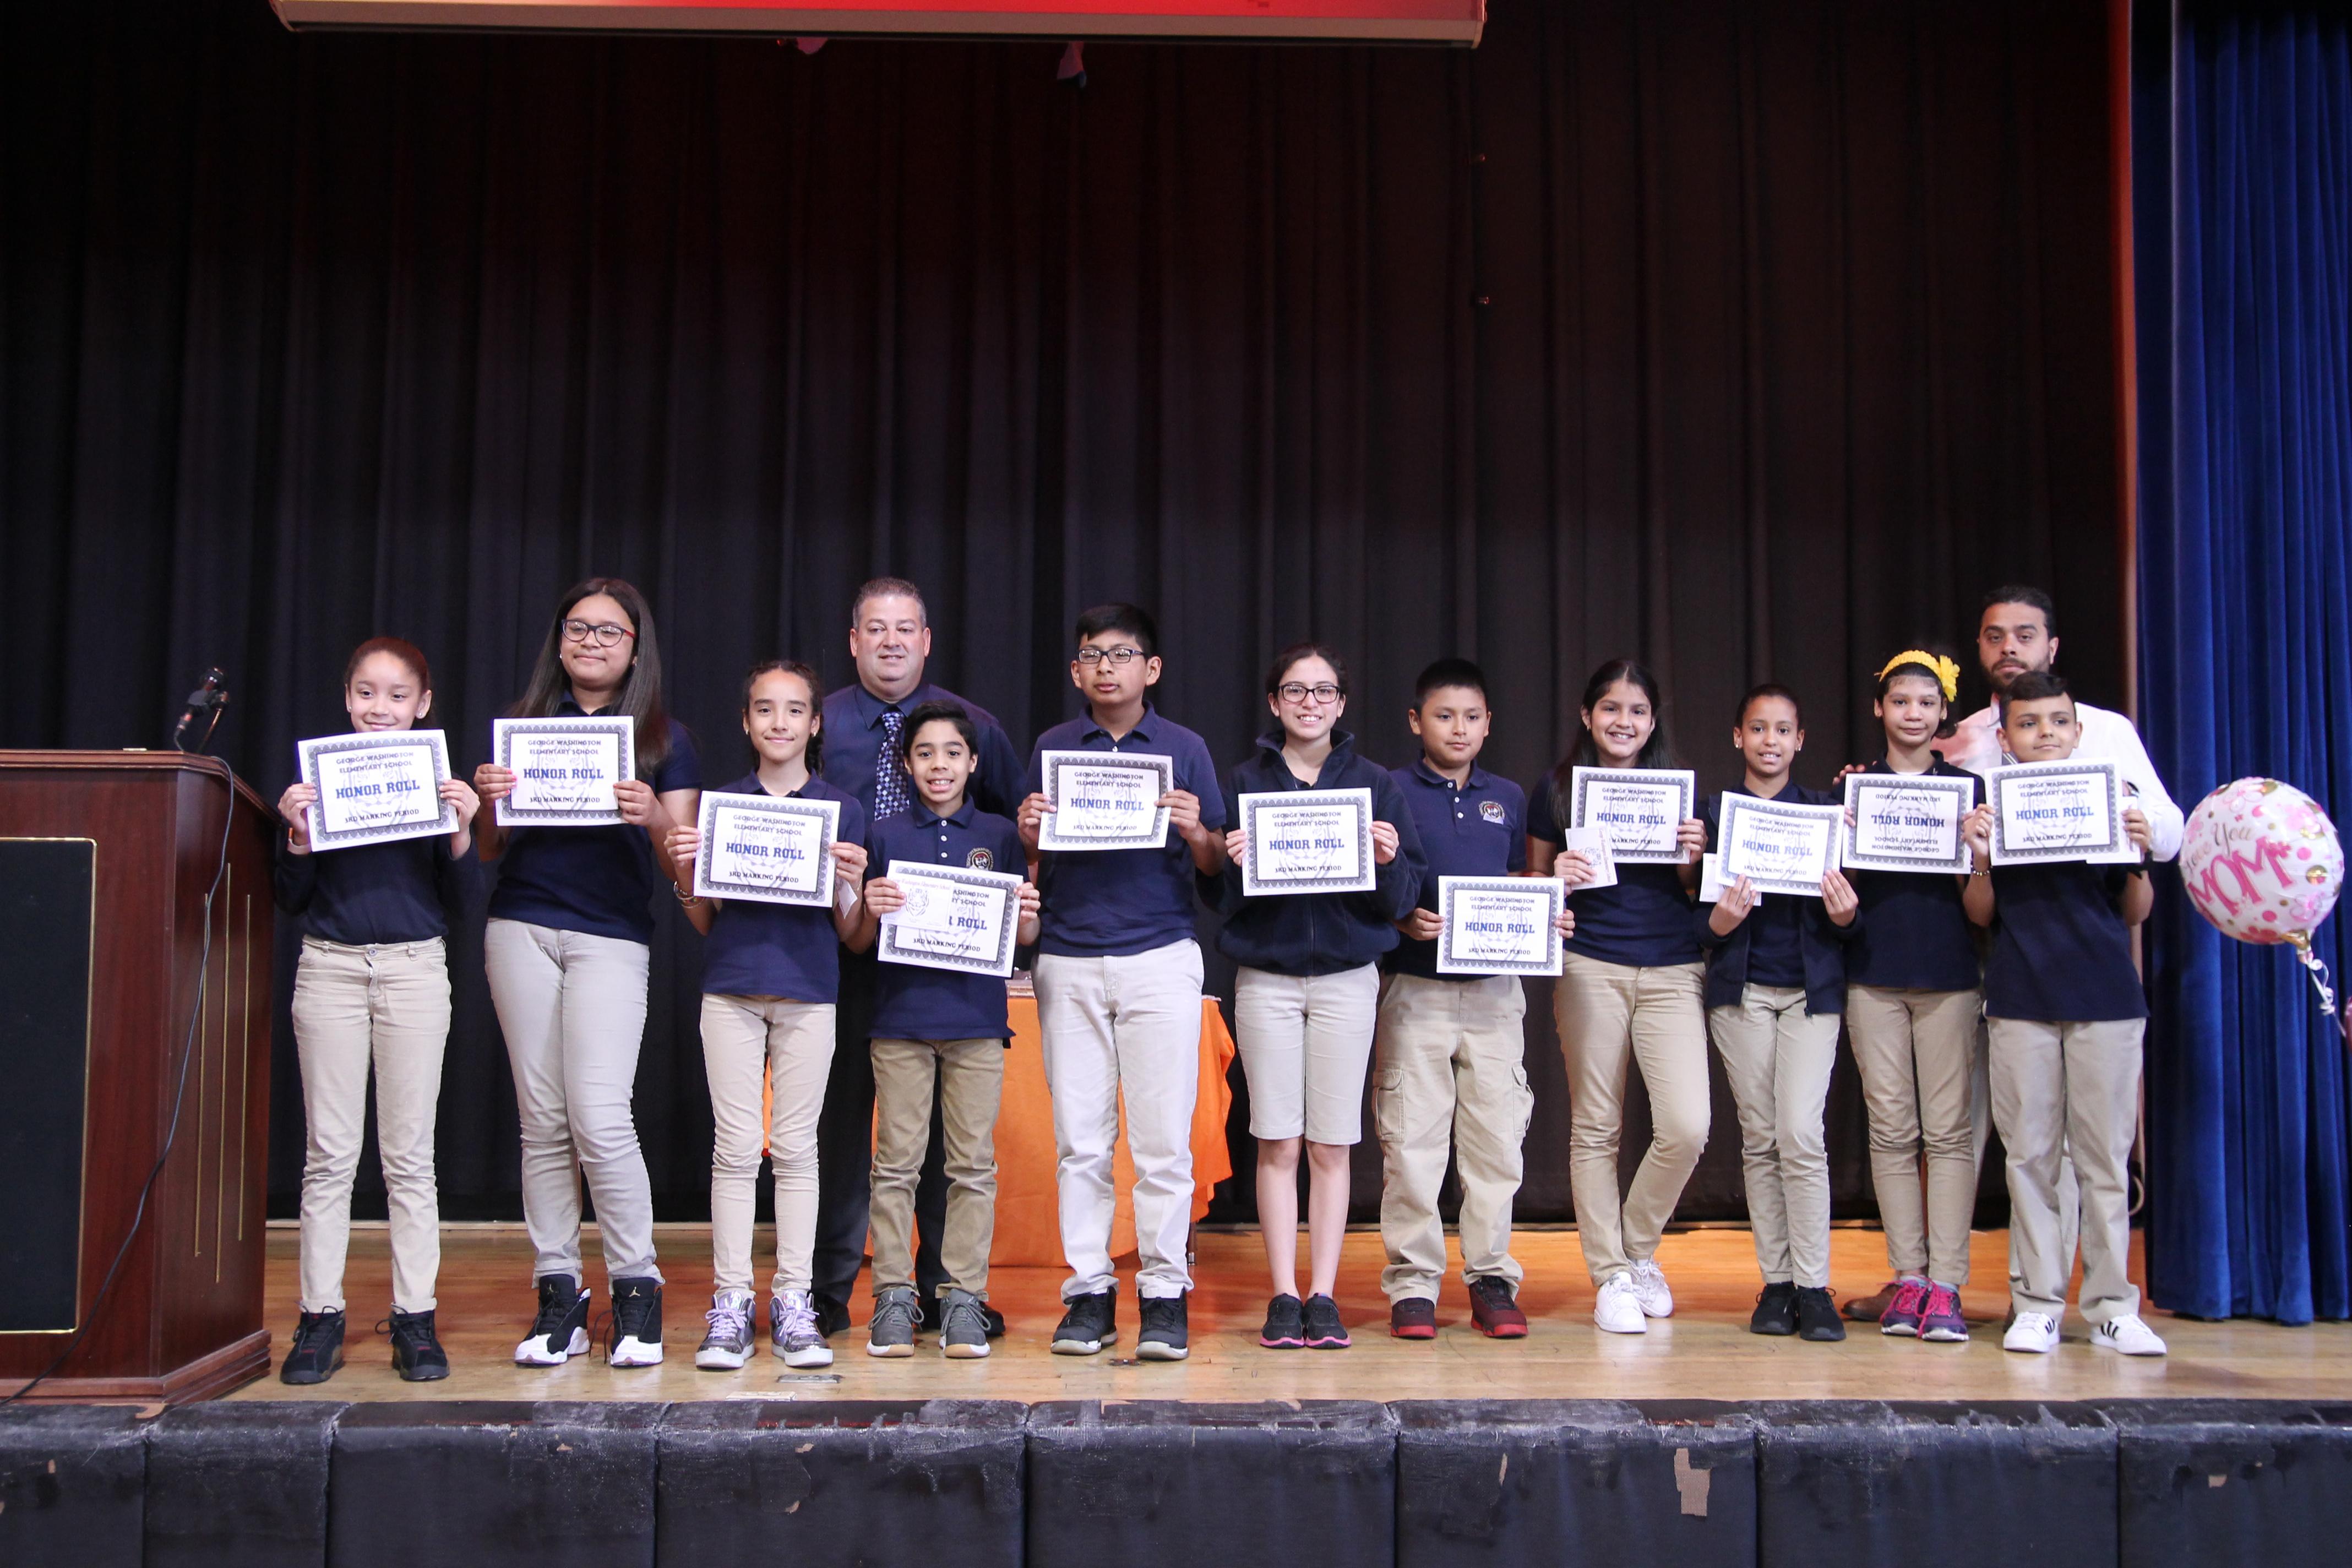 4th grade honor roll students